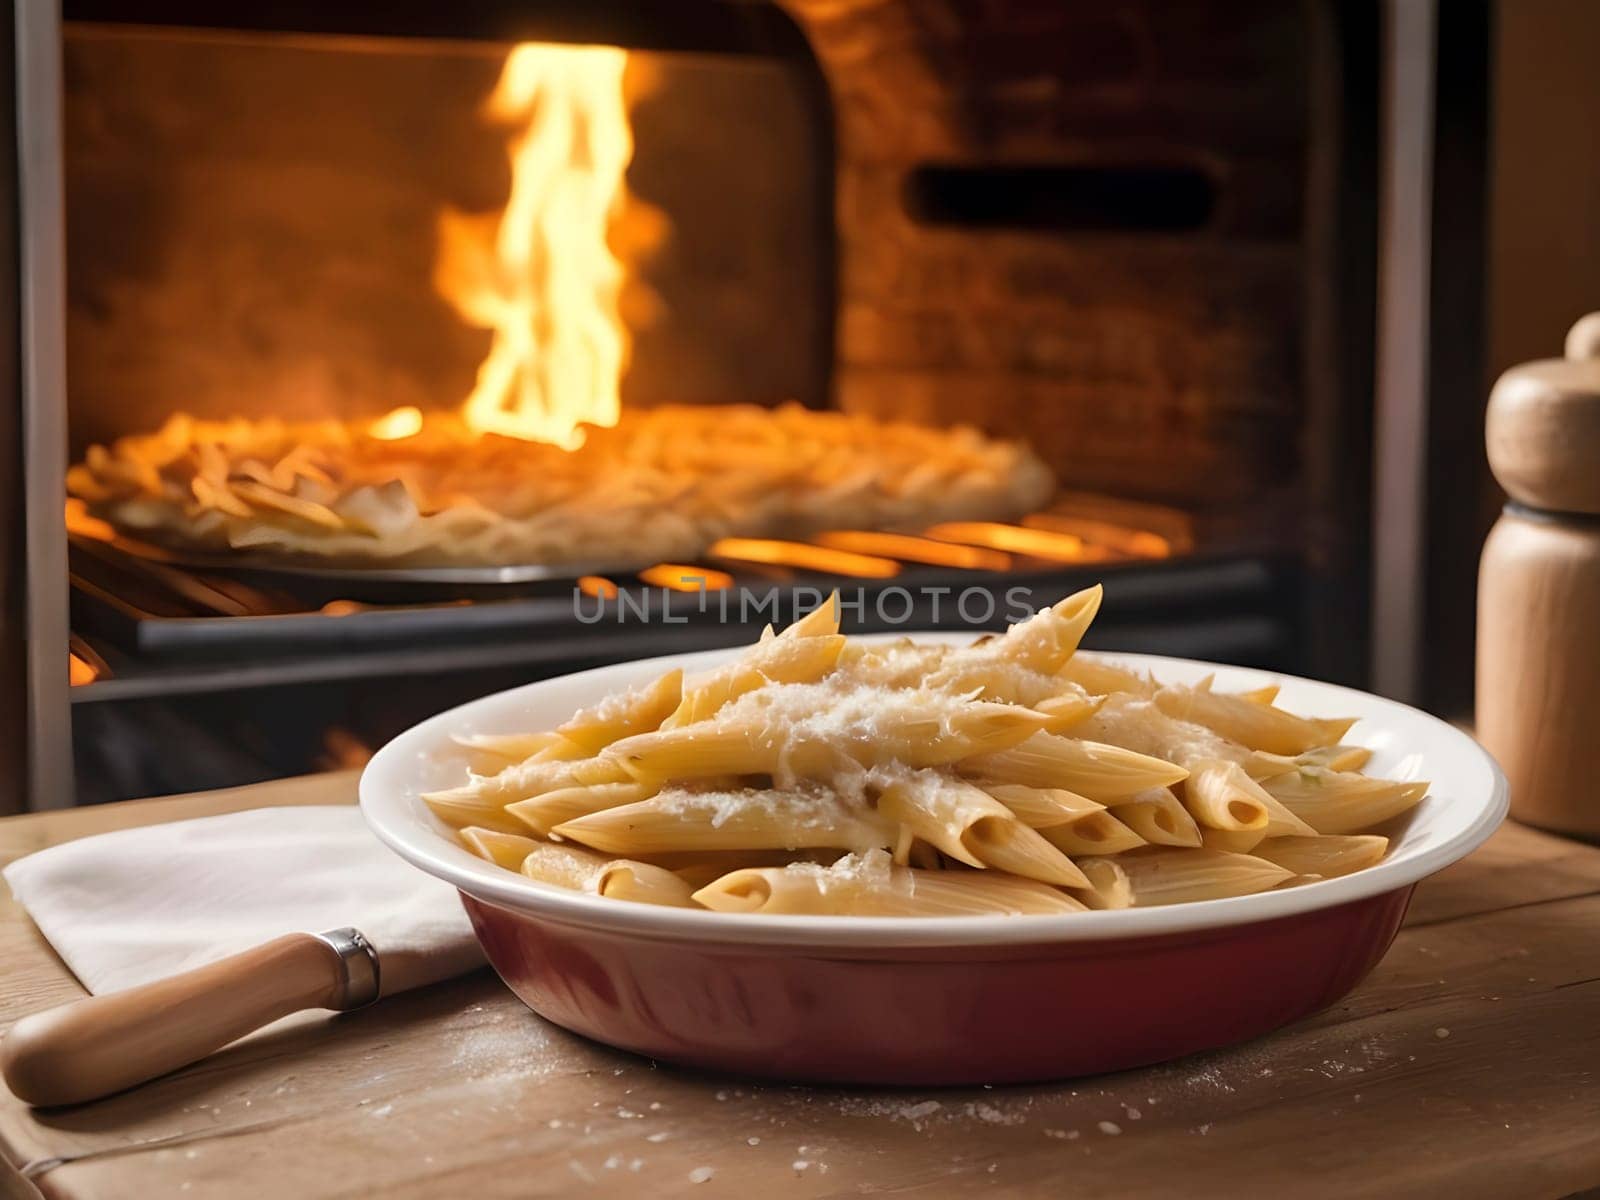 Homemade Goodness. Penne Perfection on a Wooden Table with Oven Ambiance.